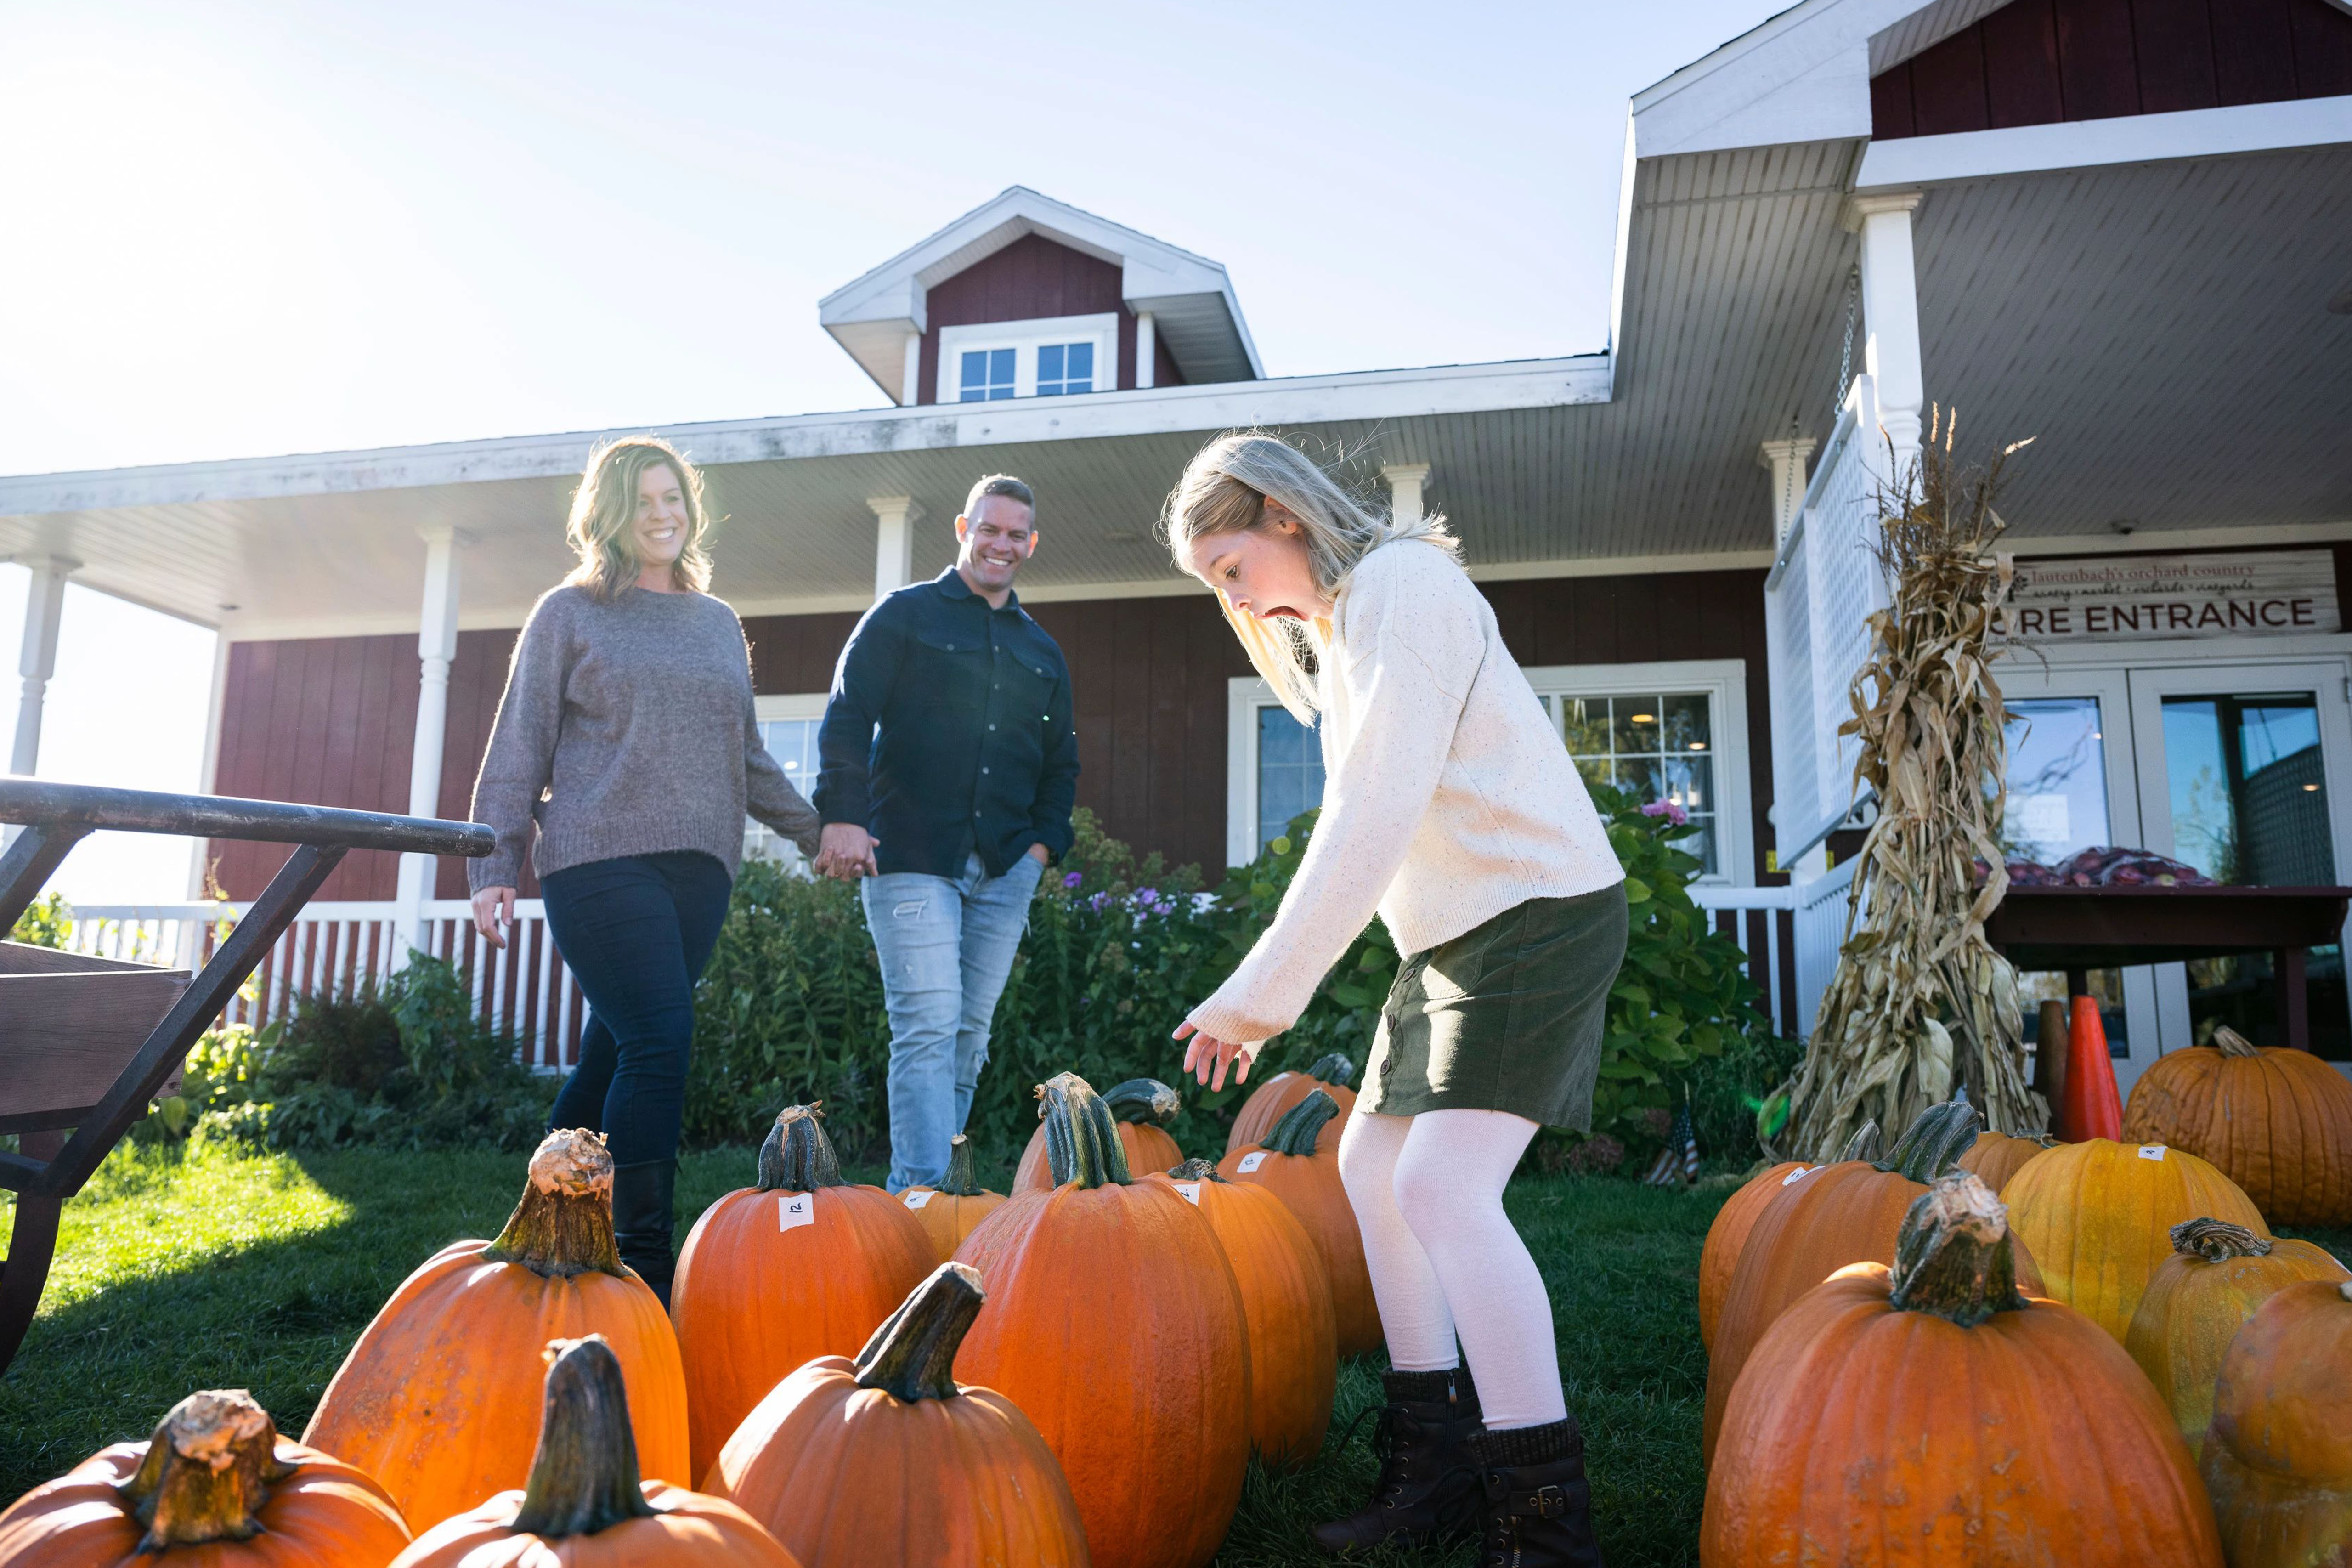 A family enjoys a fall day at Lautenbach's Orchard.